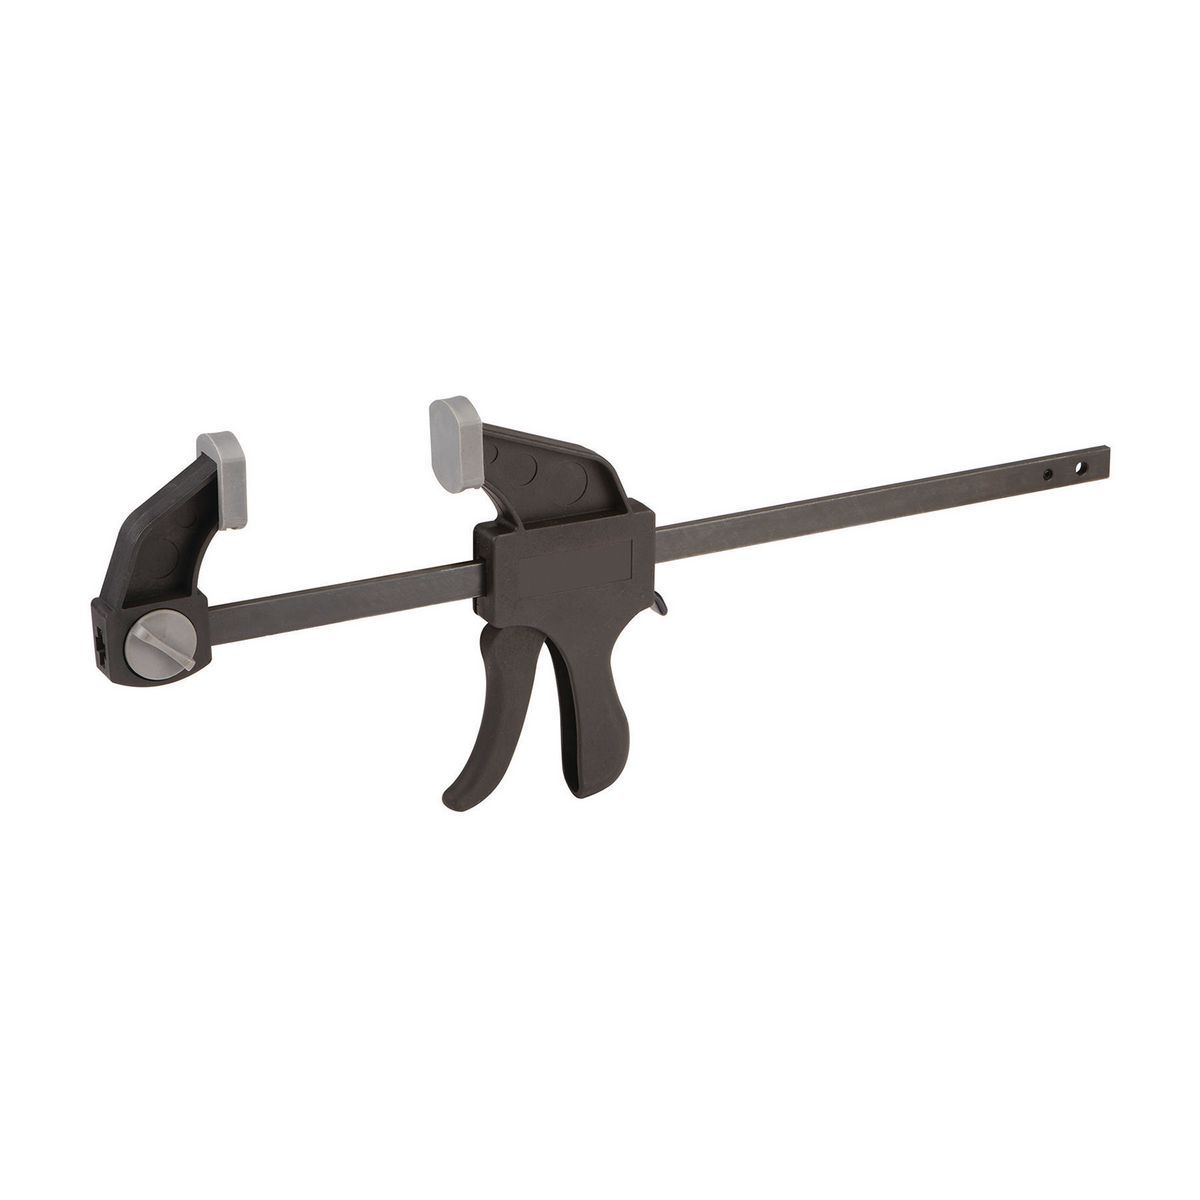 PITTSBURGH 12 in. Ratcheting Bar Clamp/Spreader